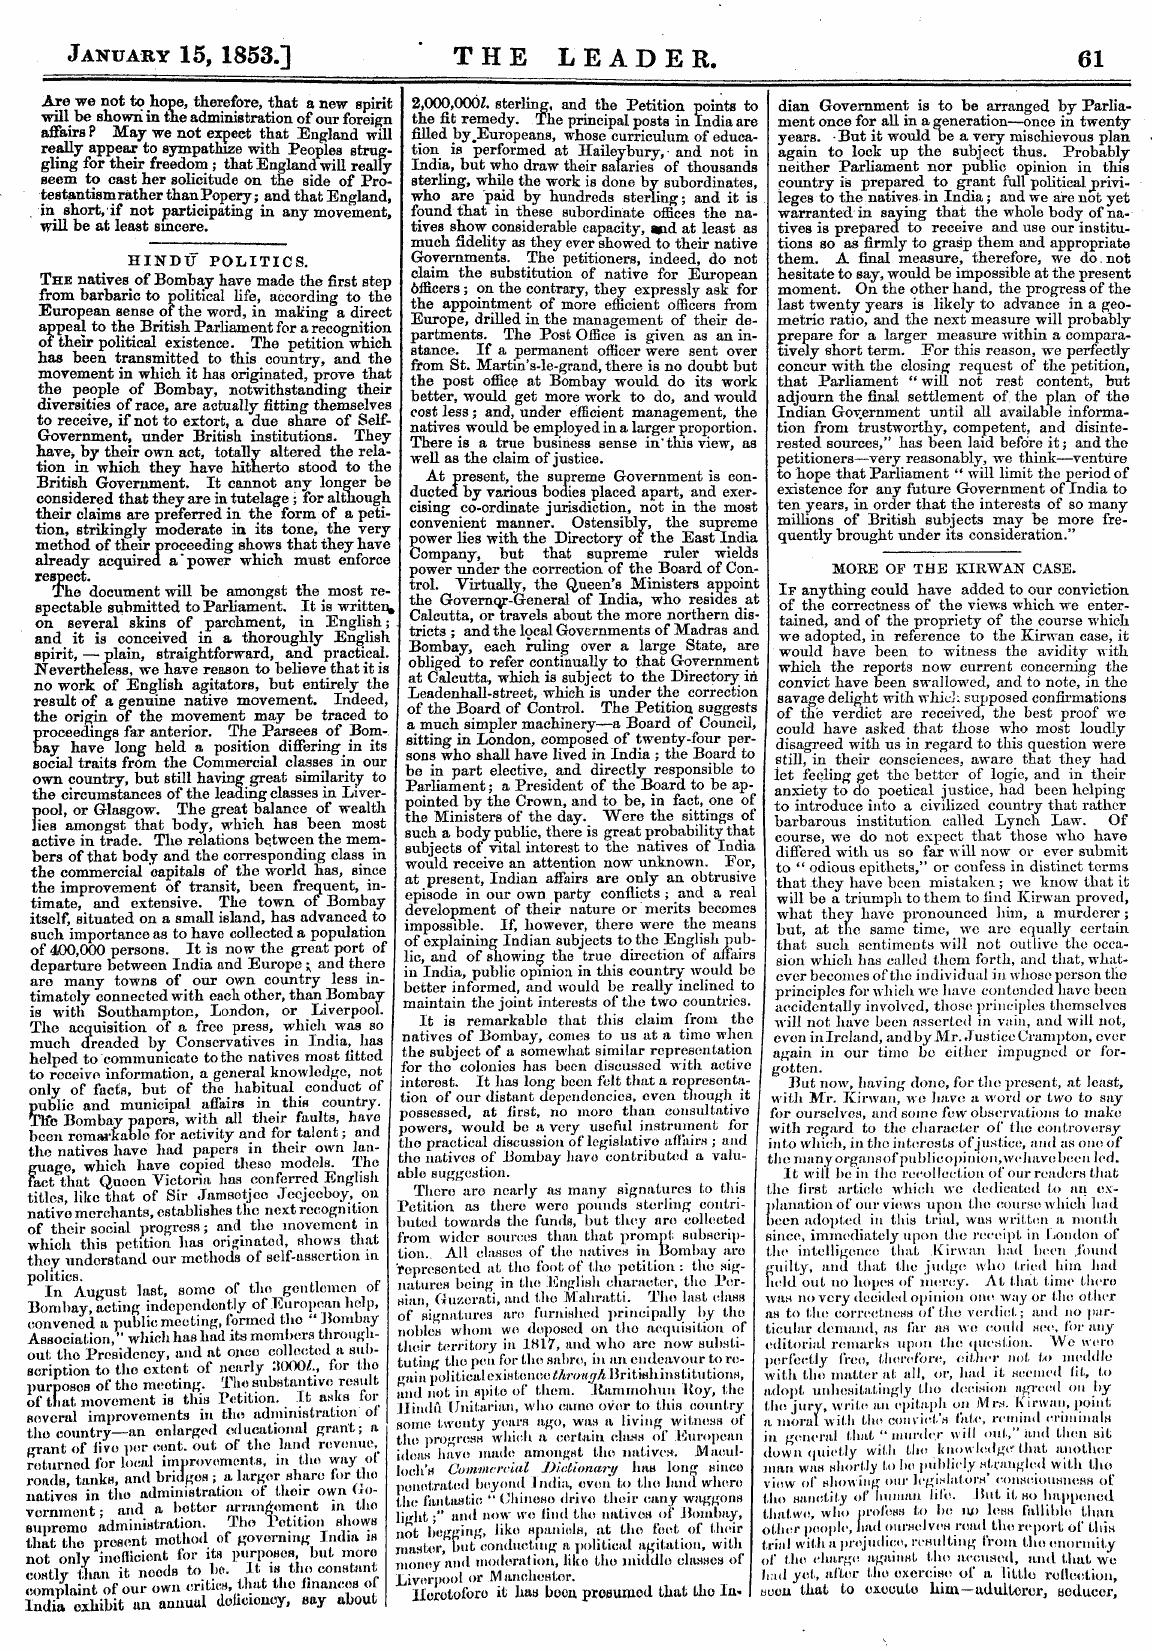 Leader (1850-1860): jS F Y, Country edition - January 15, 1853.] ' The Leader. 61